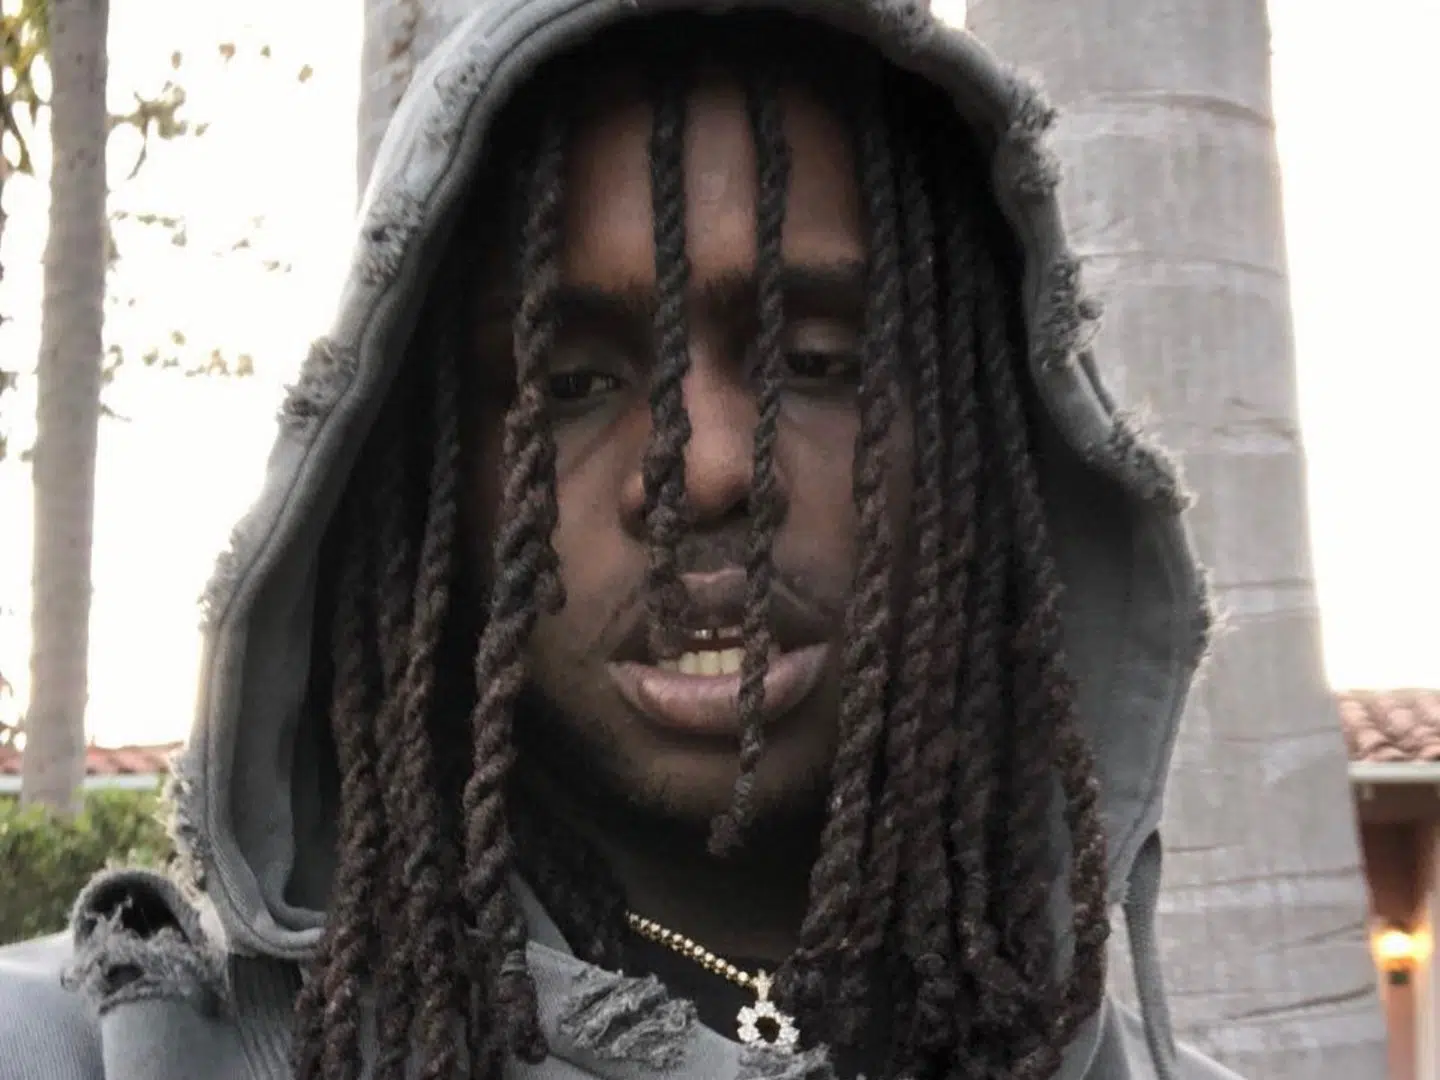 Chief Keef gets Sued for Child Support